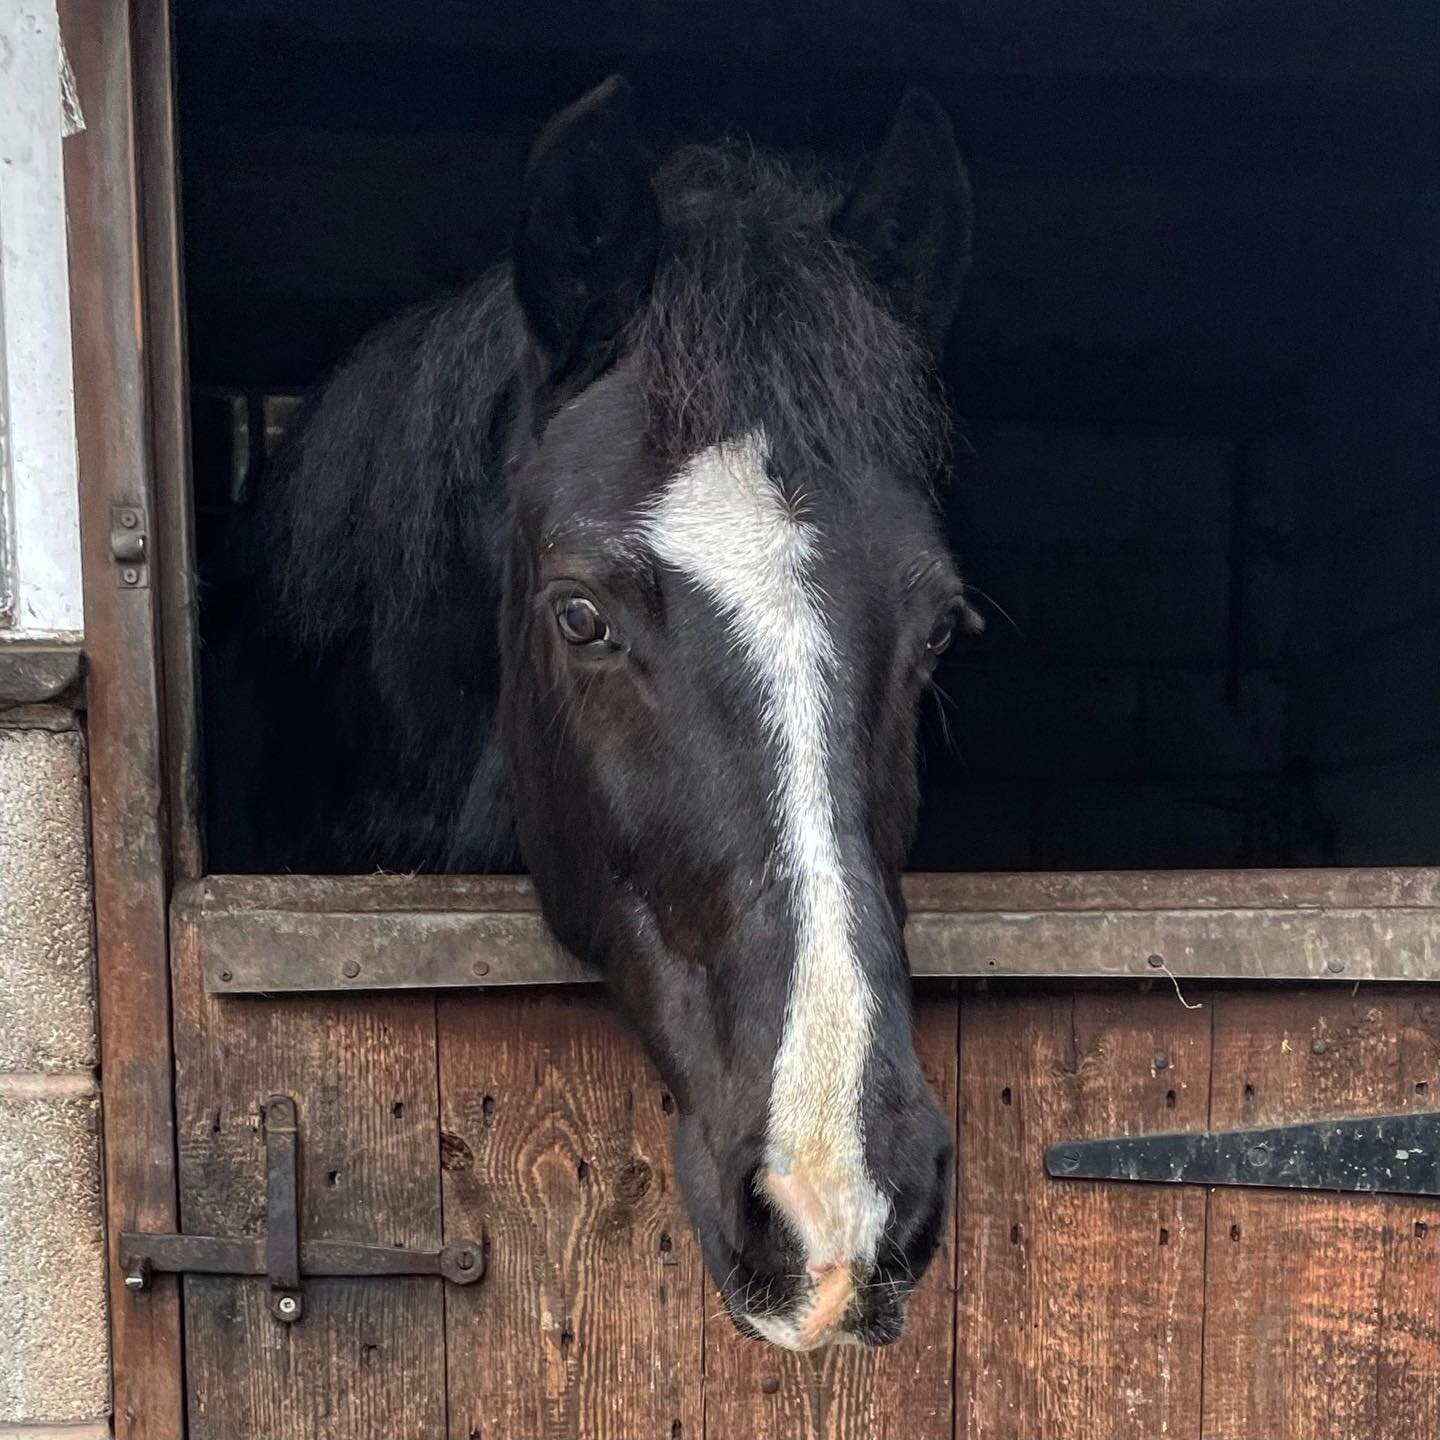 ⭐️ 𝐈𝐧𝐭𝐫𝐨𝐝𝐮𝐜𝐢𝐧𝐠 . . . Tyson! A handsome chap with heaps of personality. He&rsquo;s a proper gent of a pony and enjoys playing with one of the biggest at birtles, Ben! ⭐️ #pony#riding#horse#horse-riding#ukridingschool#britishridingschool#rid